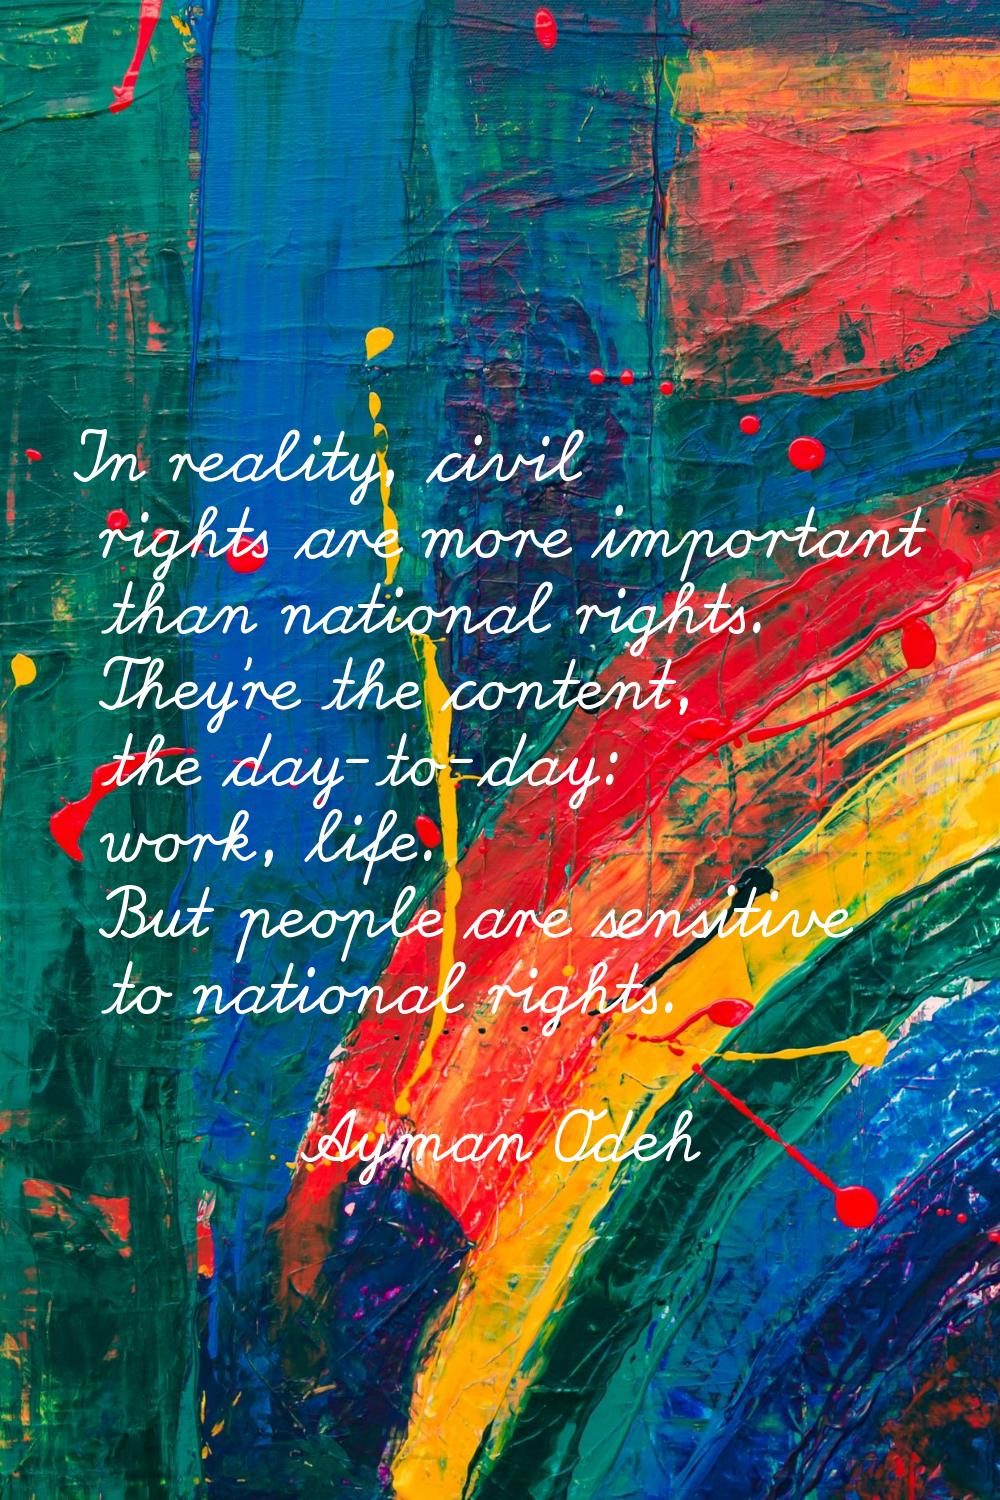 In reality, civil rights are more important than national rights. They're the content, the day-to-d